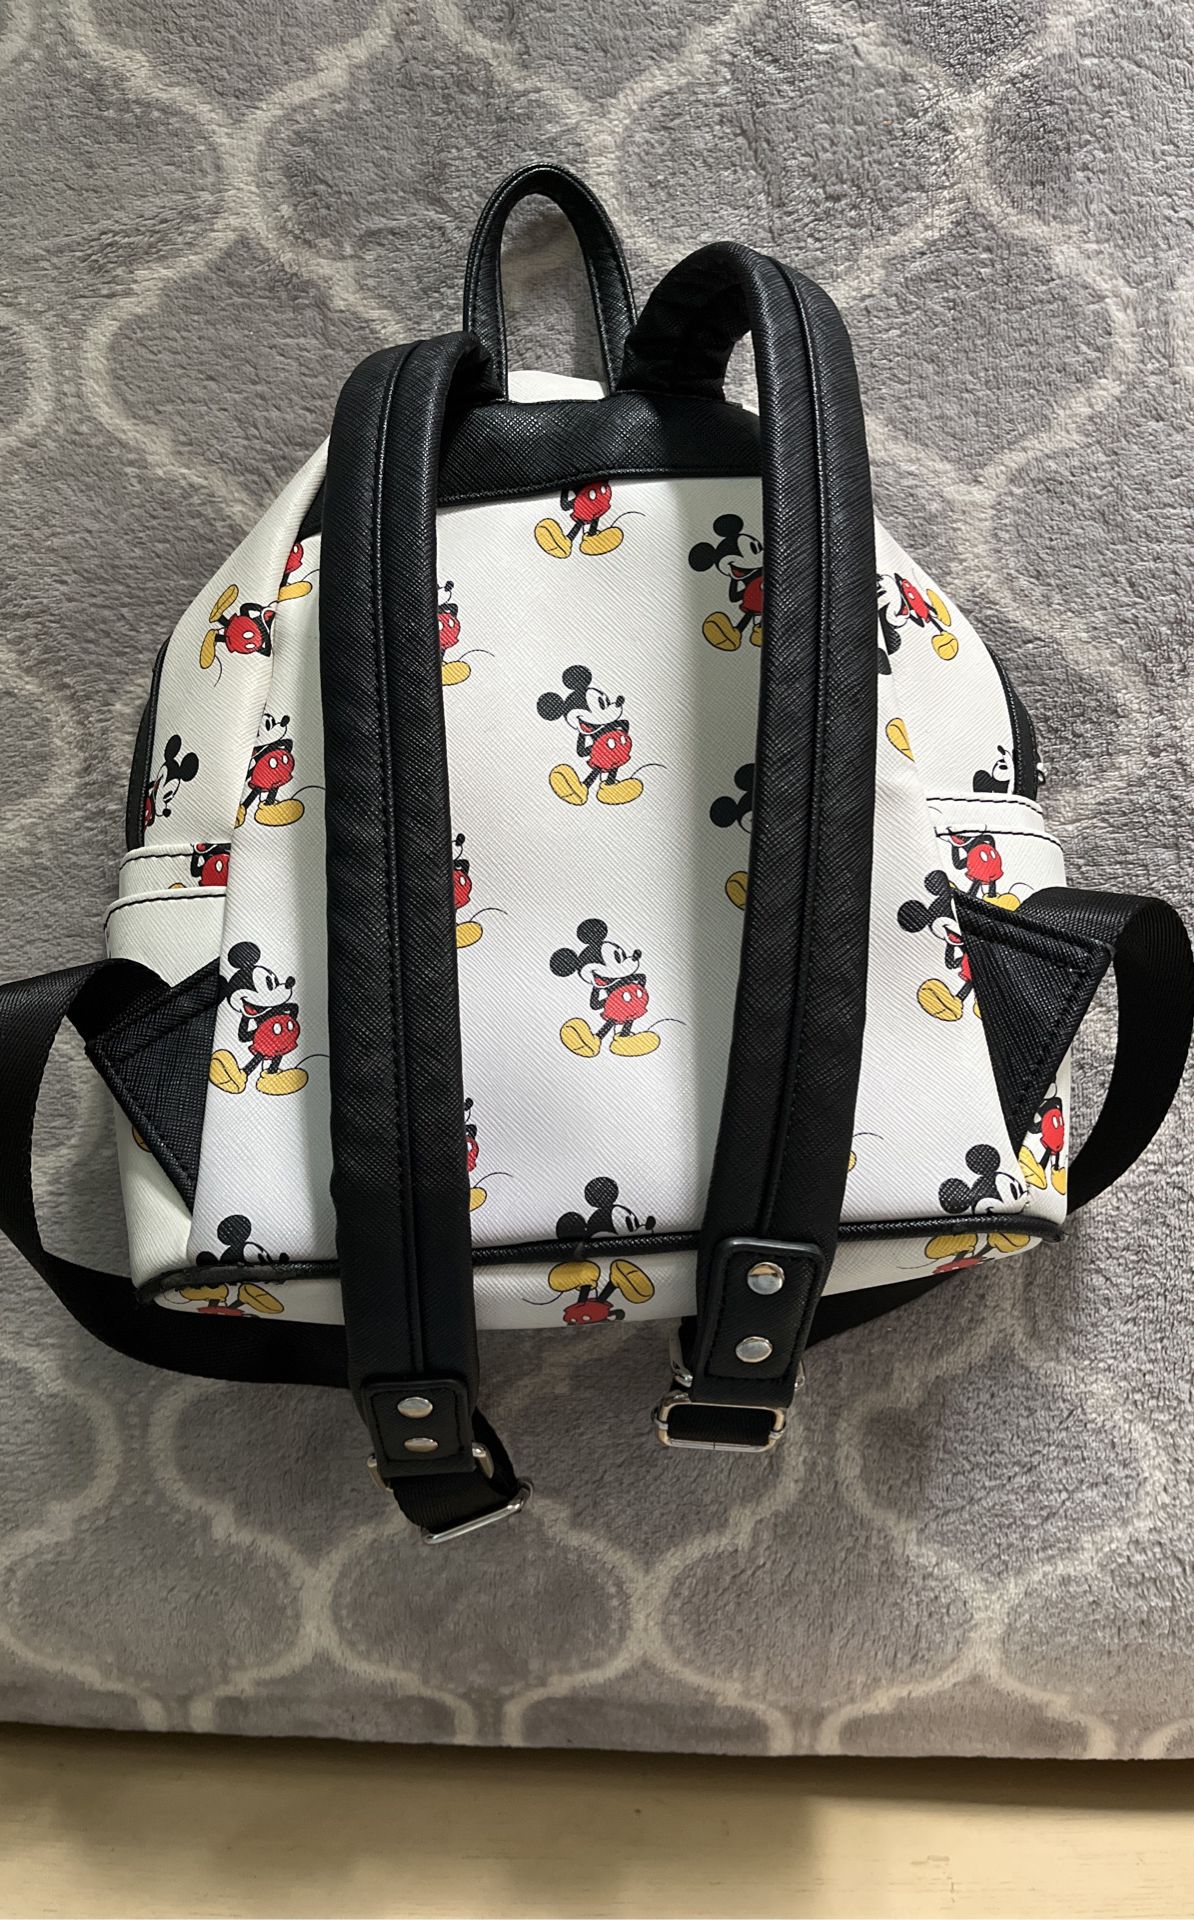 Teal / Mint 151 Pokemon Loungefly Mini Backpack & Wallet Set for Sale in  Tustin, CA - OfferUp